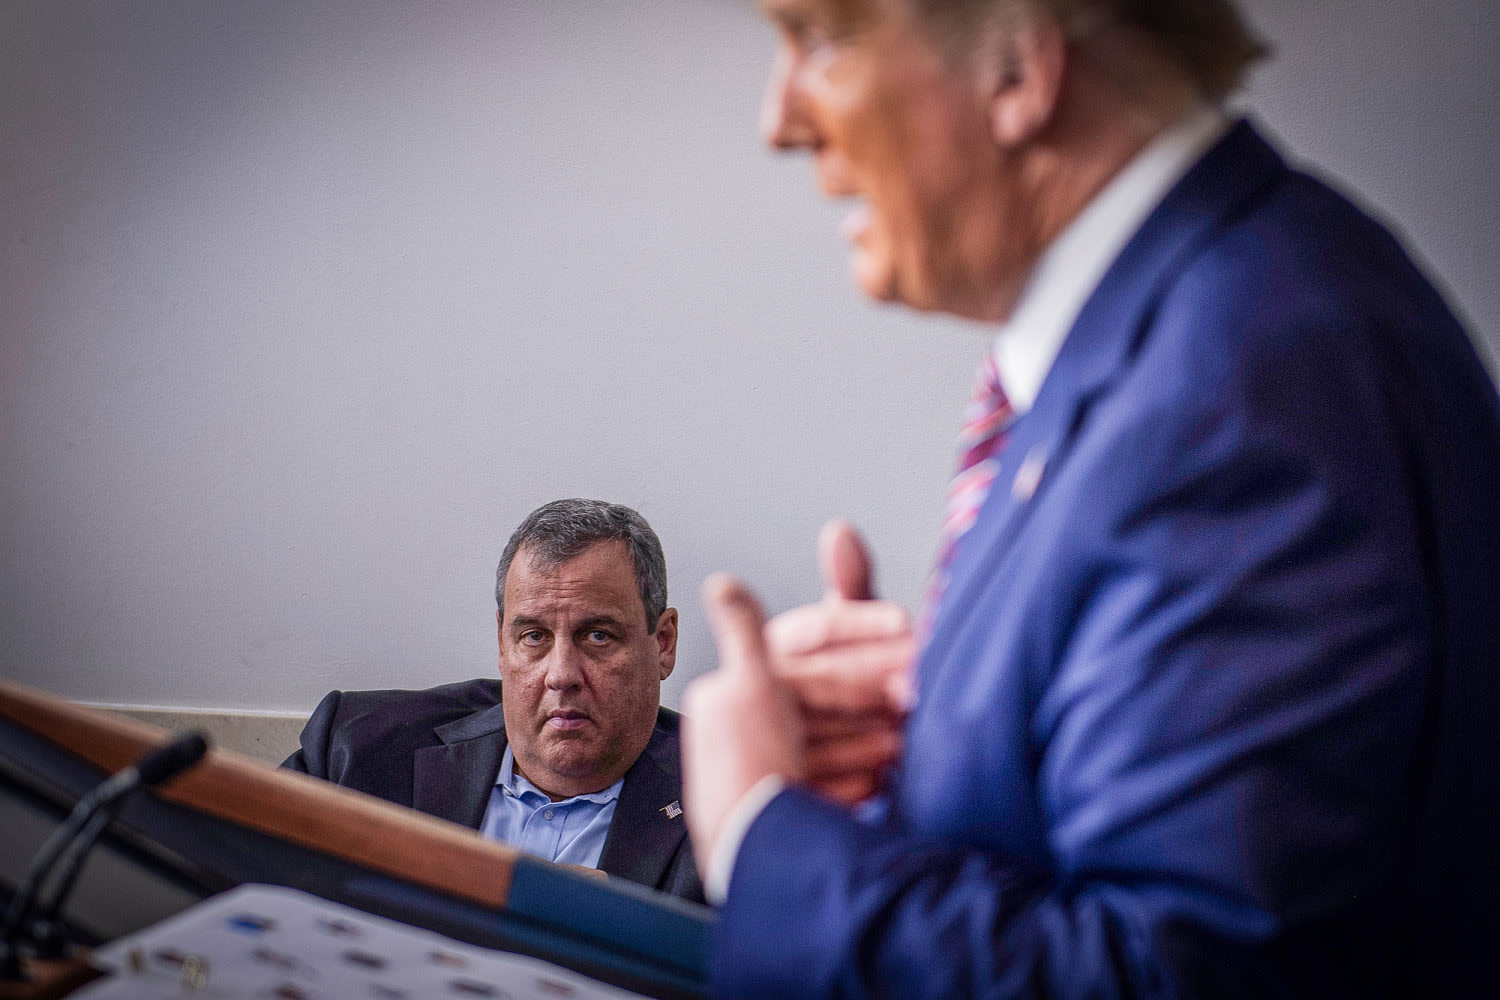 Opinion | Chris Christie should know better